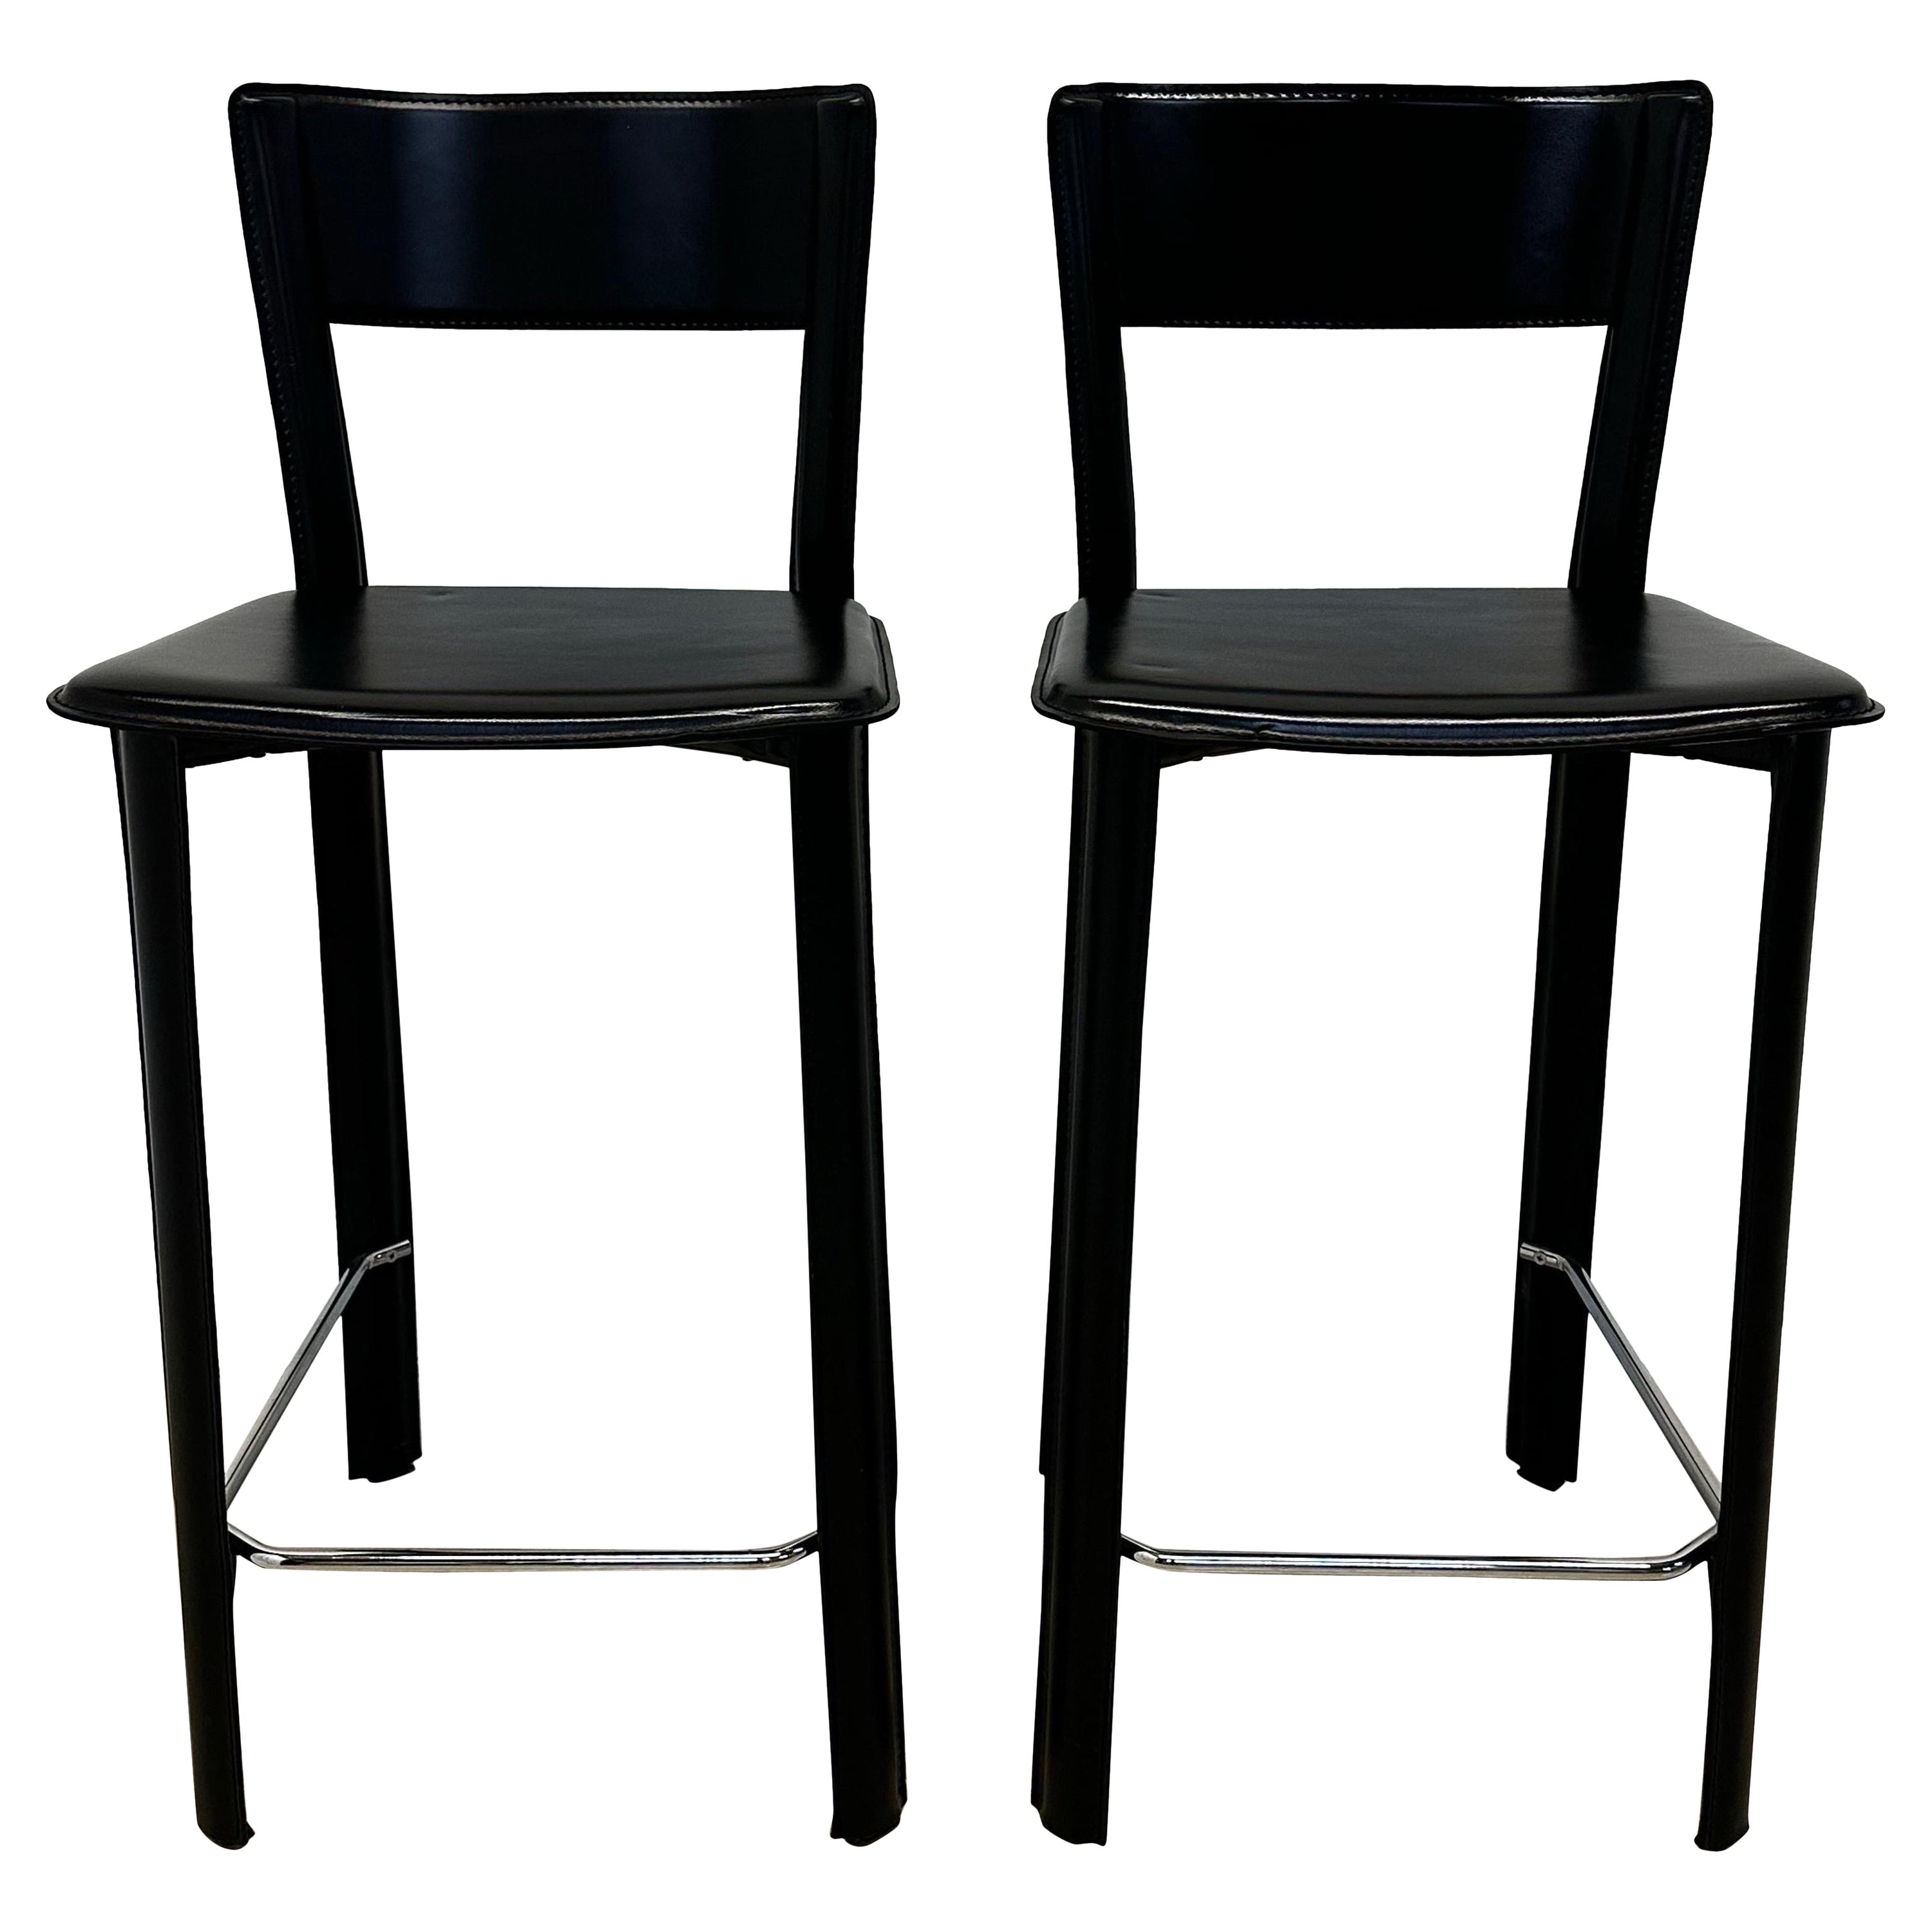 Frag Italy Stitched Black Leather Counter Stools - a Pair